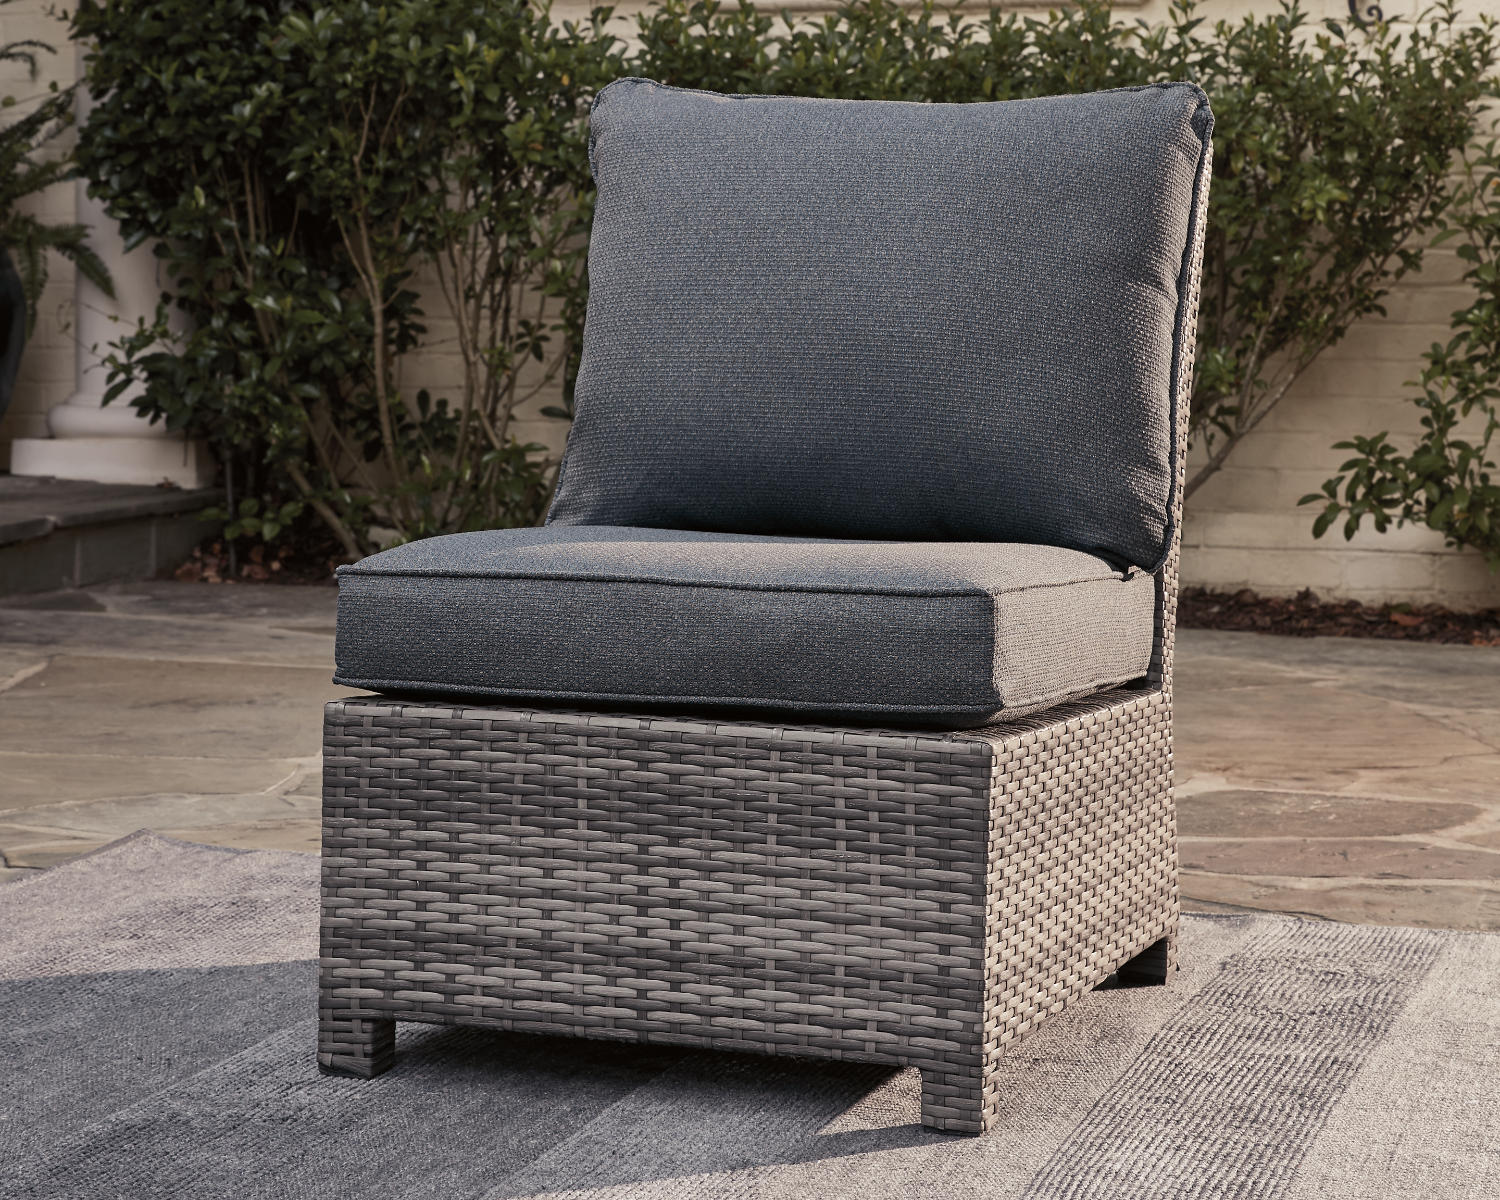 Signature Design by Ashley Salem Beach Outdoor Resin Wicker Armless Chair, Gray - image 2 of 6